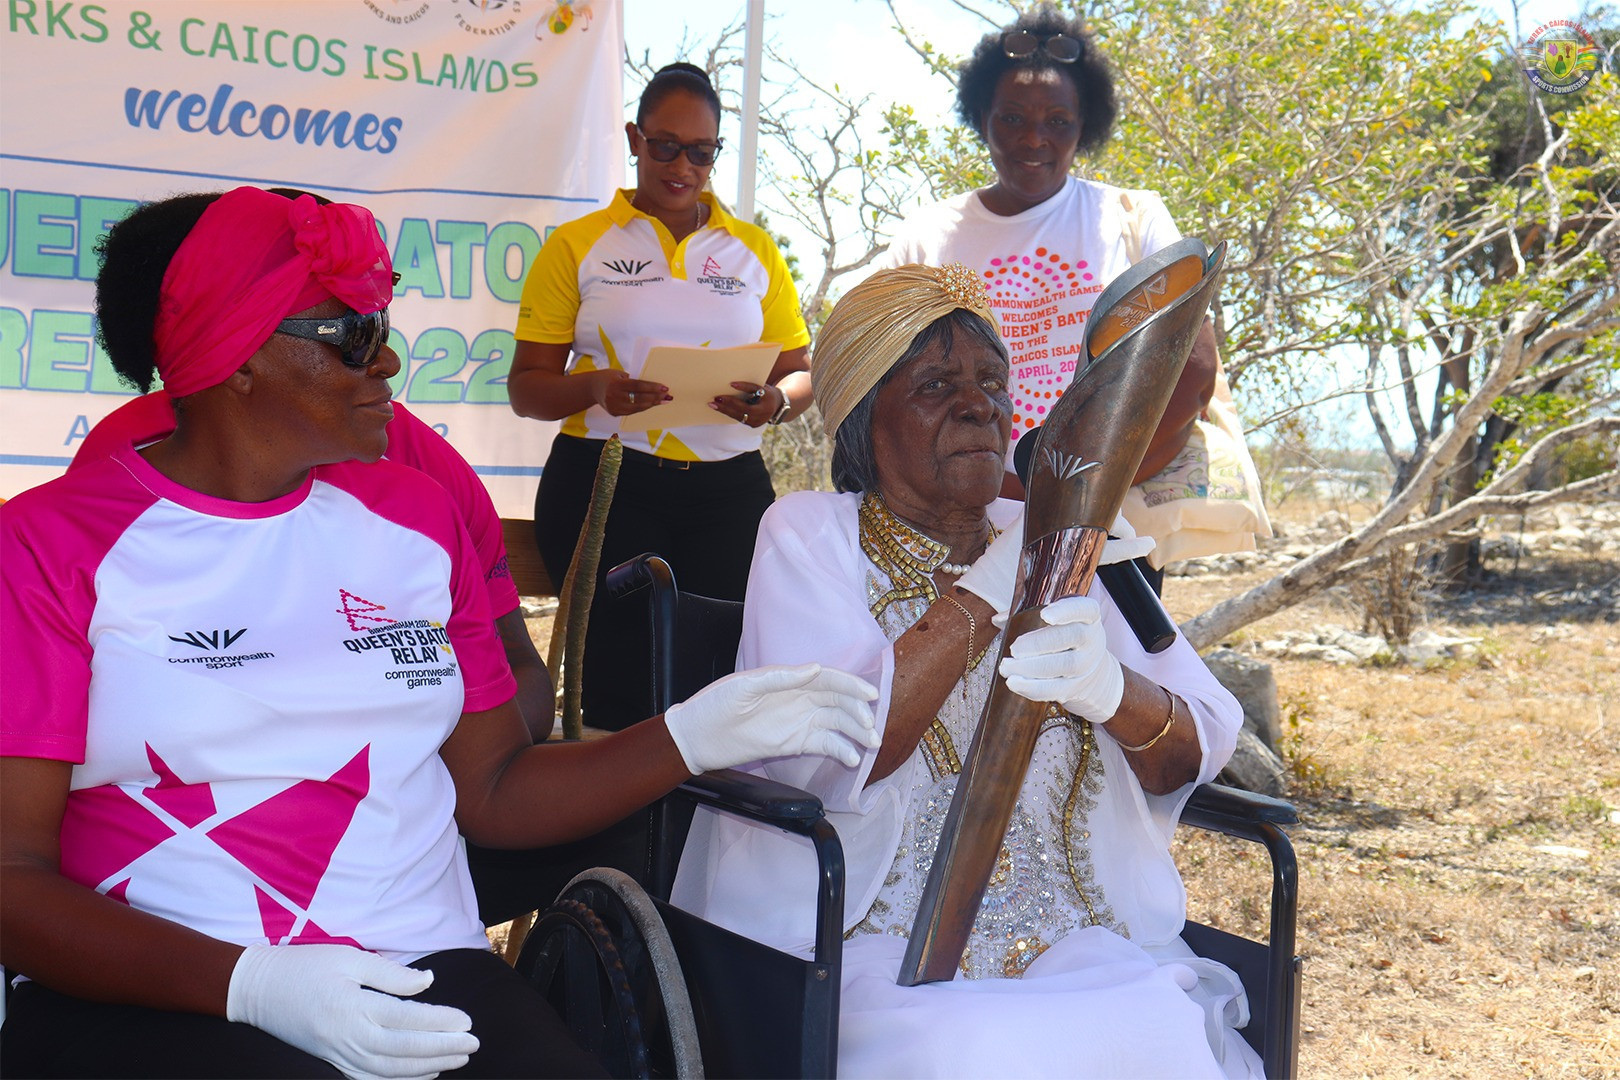 Eve Landy, aged 100, held the Baton during its journey to the Turks and Caicos Islands ©Turks and Caicos Islands Sports Commission